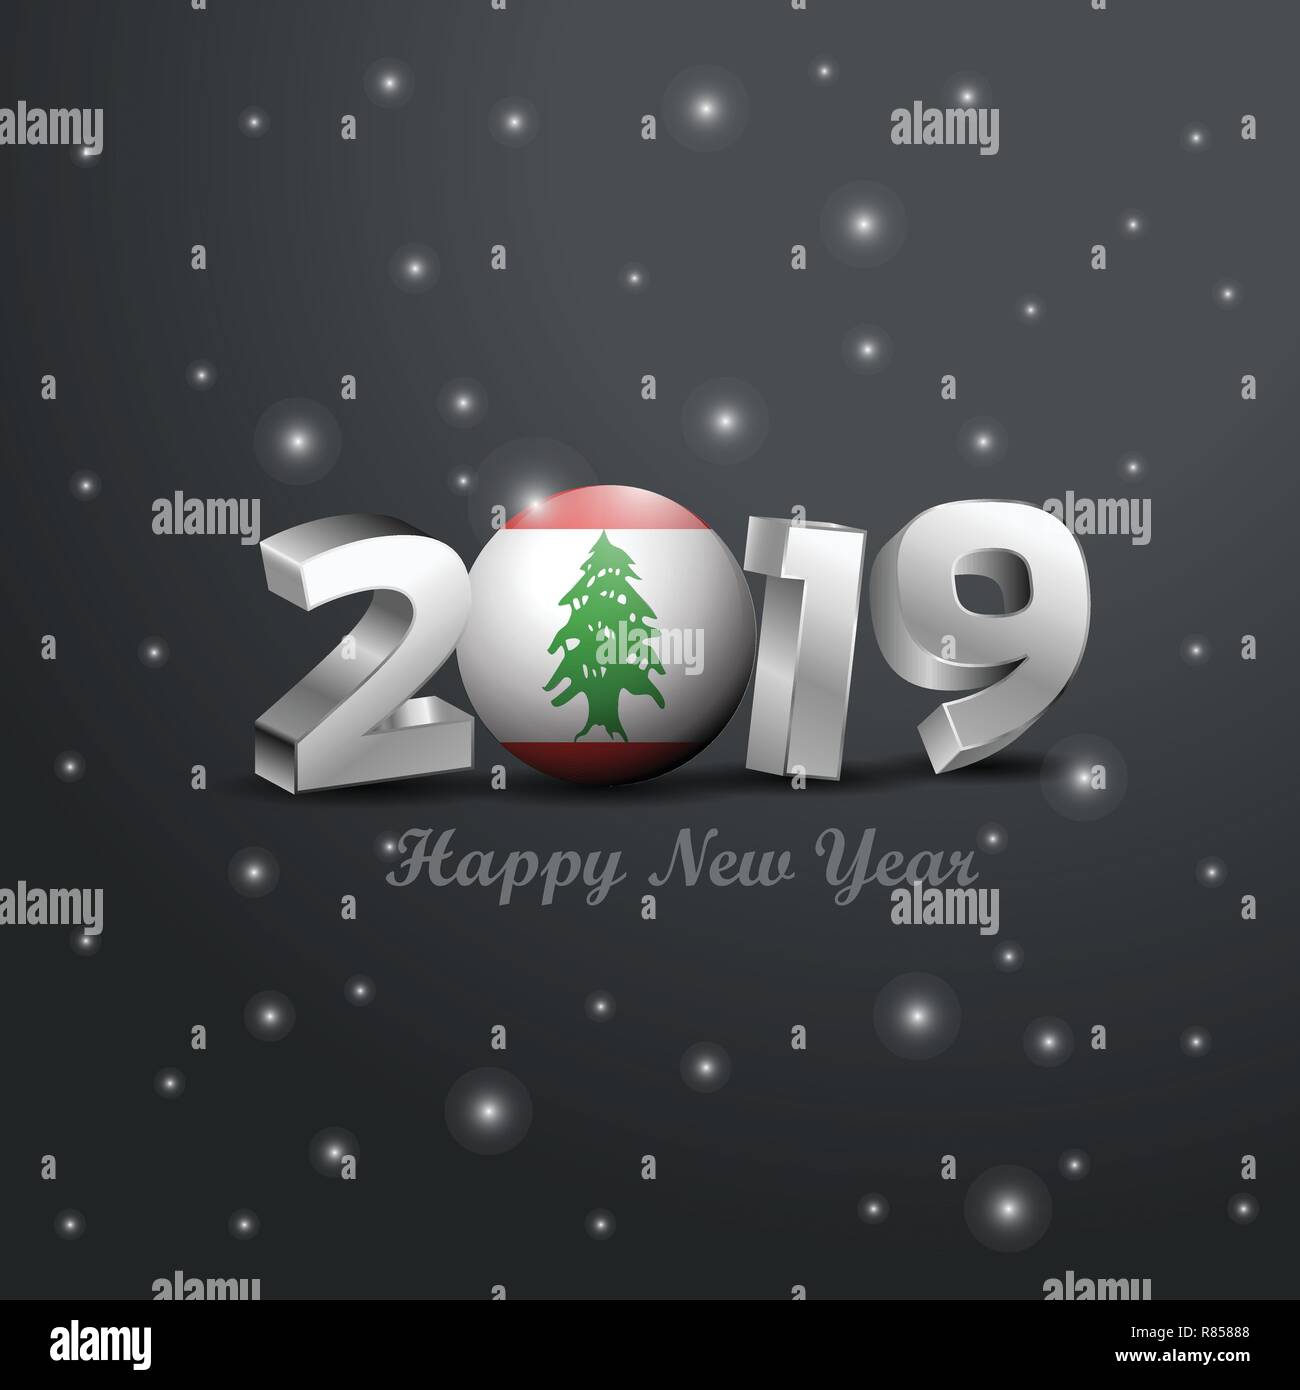 2019 Happy New Year Lebanon Flag Typography. Abstract Celebration background Stock Vector